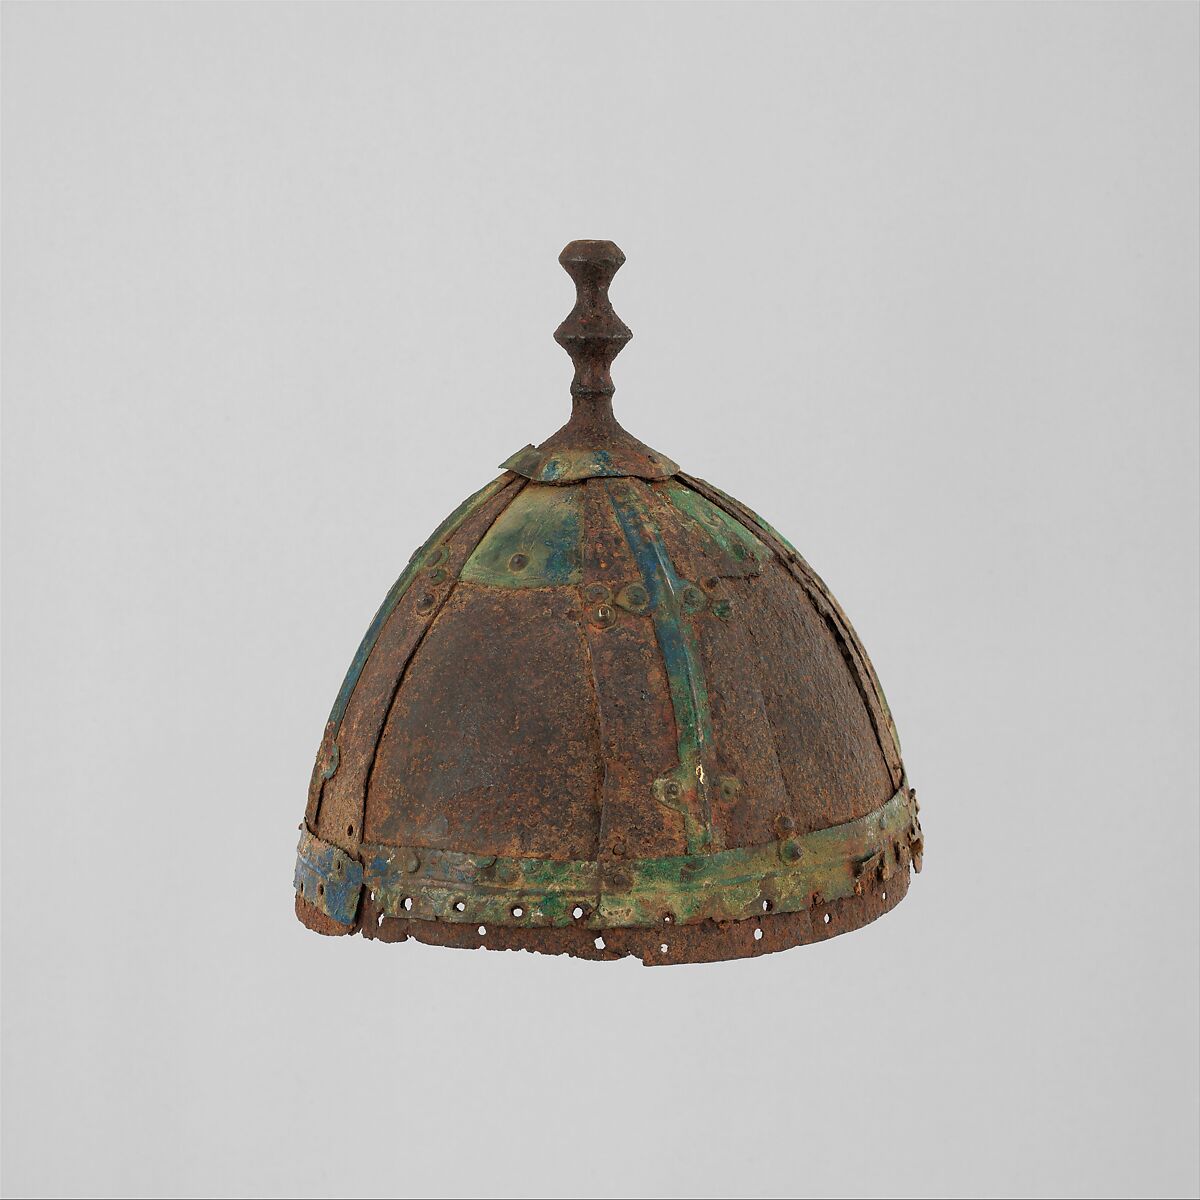 Eight-Plate Helmet, Iron, copper alloy, leather, possibly Tibetan 